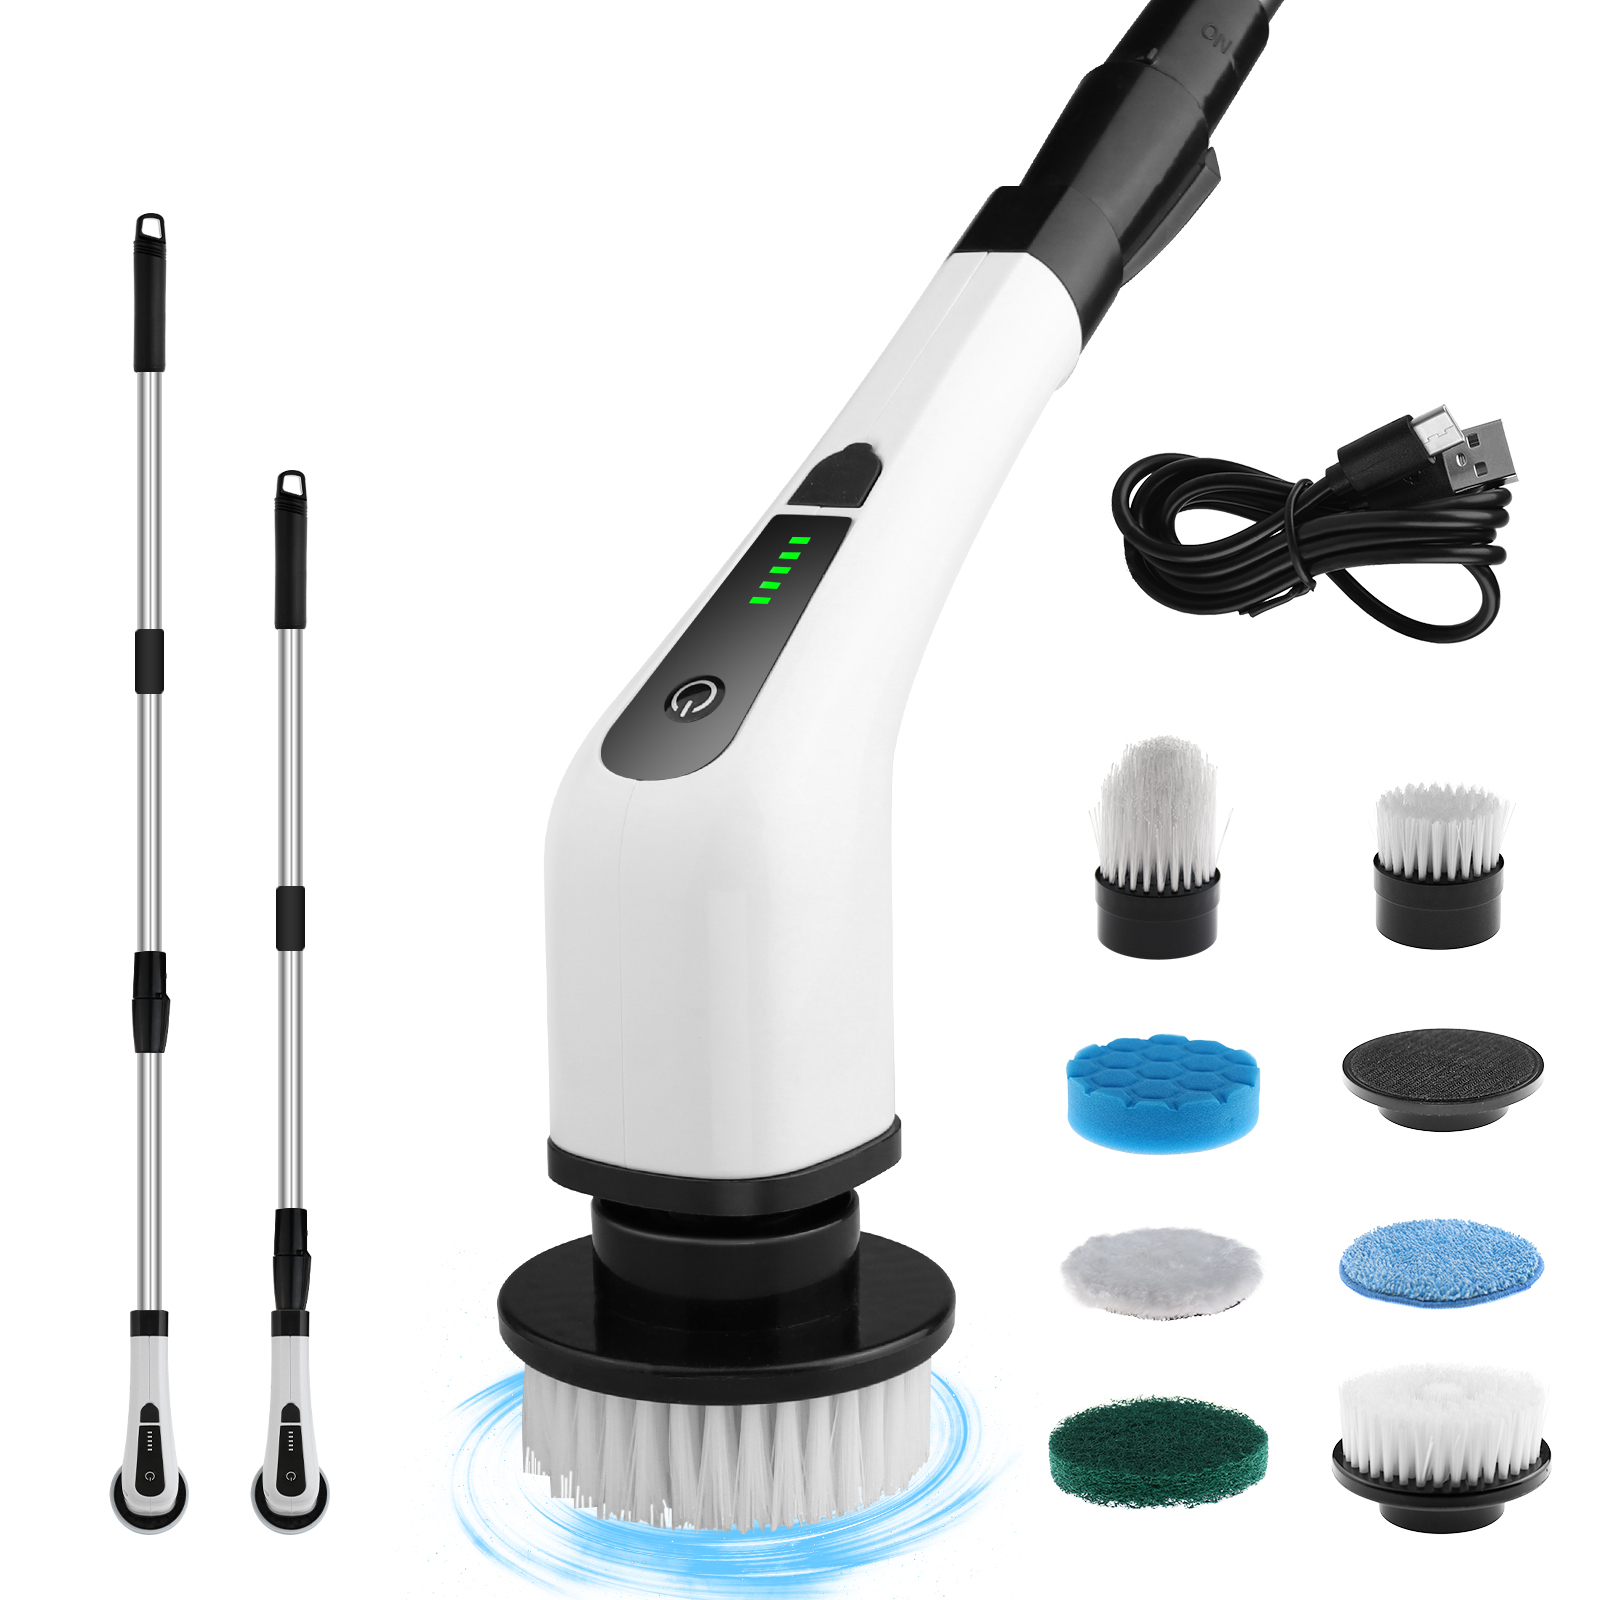 8 in 1 Adjustable Electric Spin Scrubber Cordless Shower Scrubber